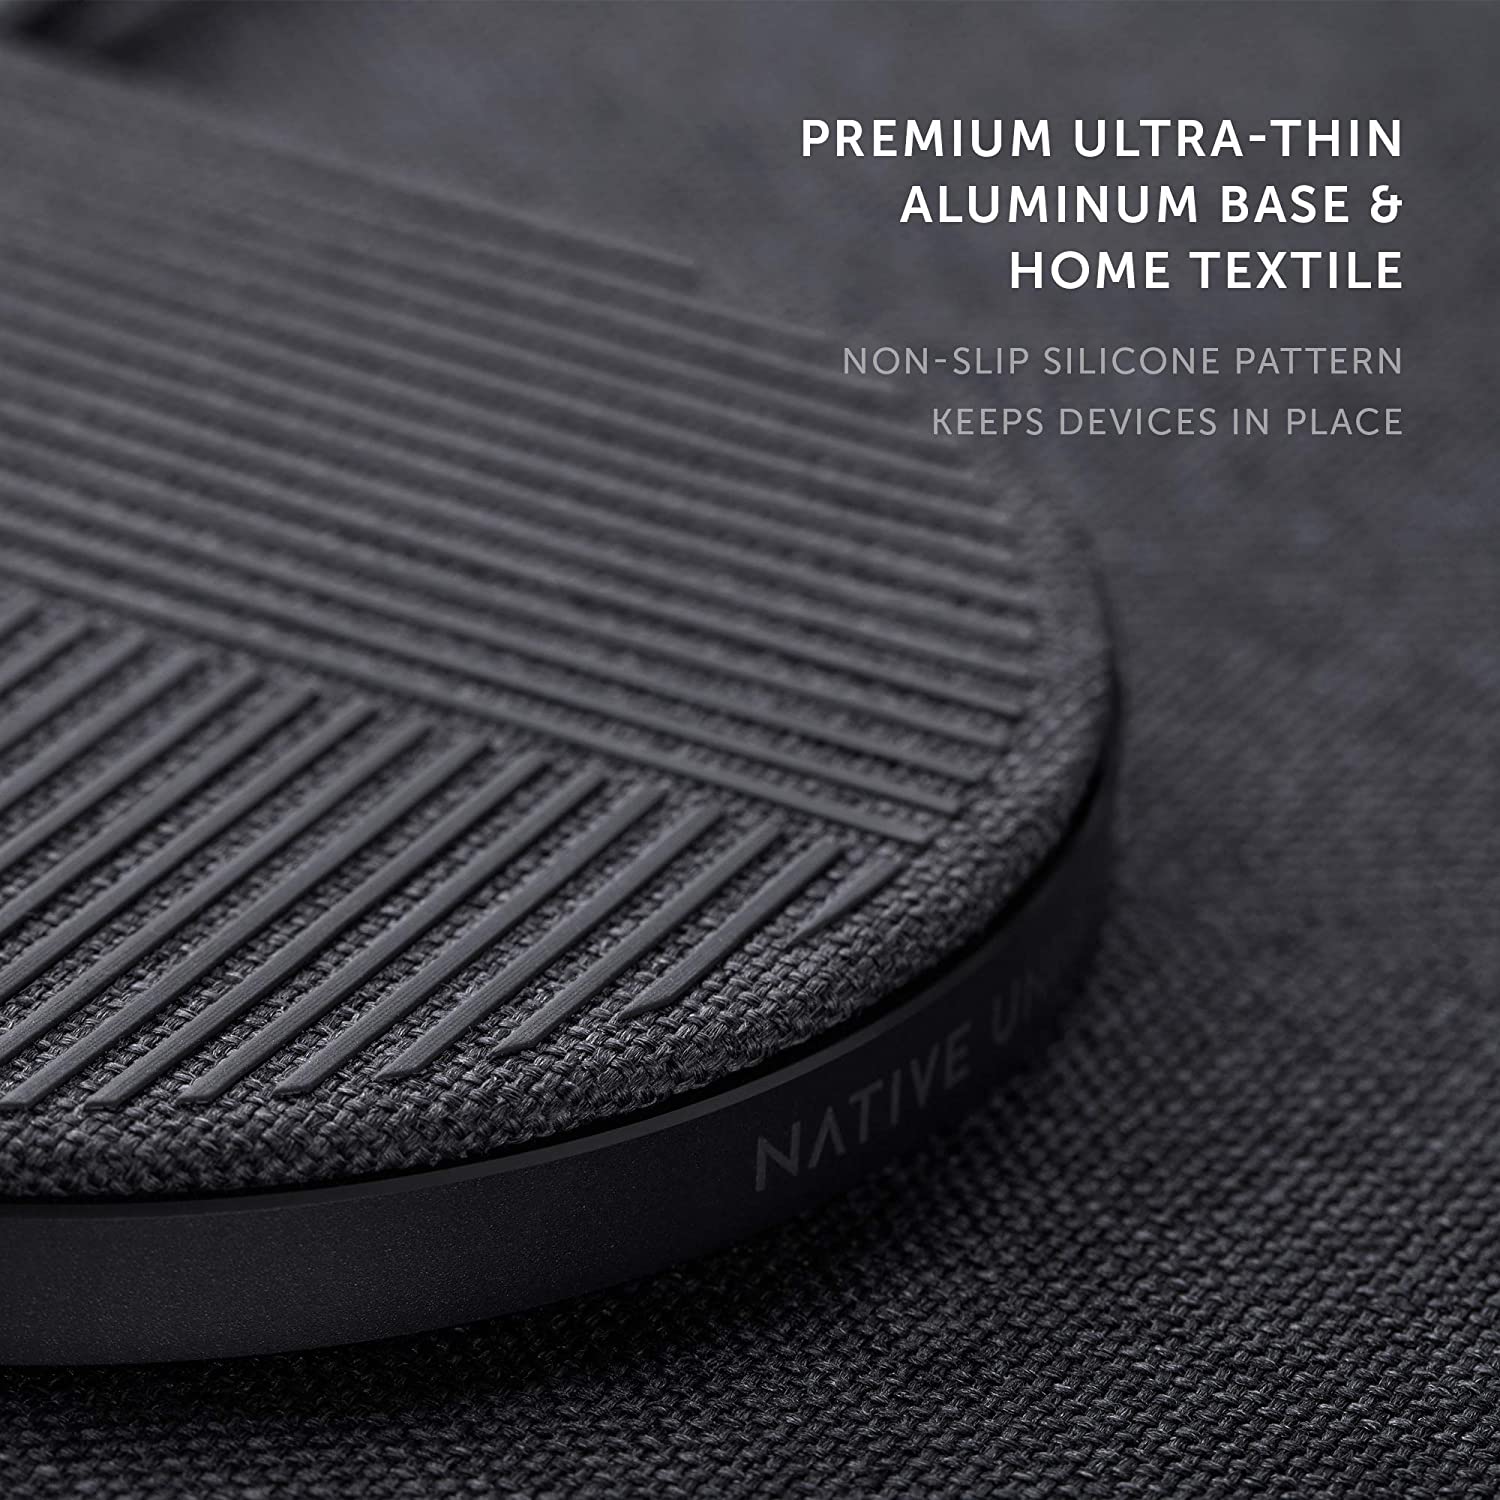 Native Union Drop XL Wireless Charger – 10W Multi-Device Fast Charging Pad compatible with iPhone & Qi Compatible Devices